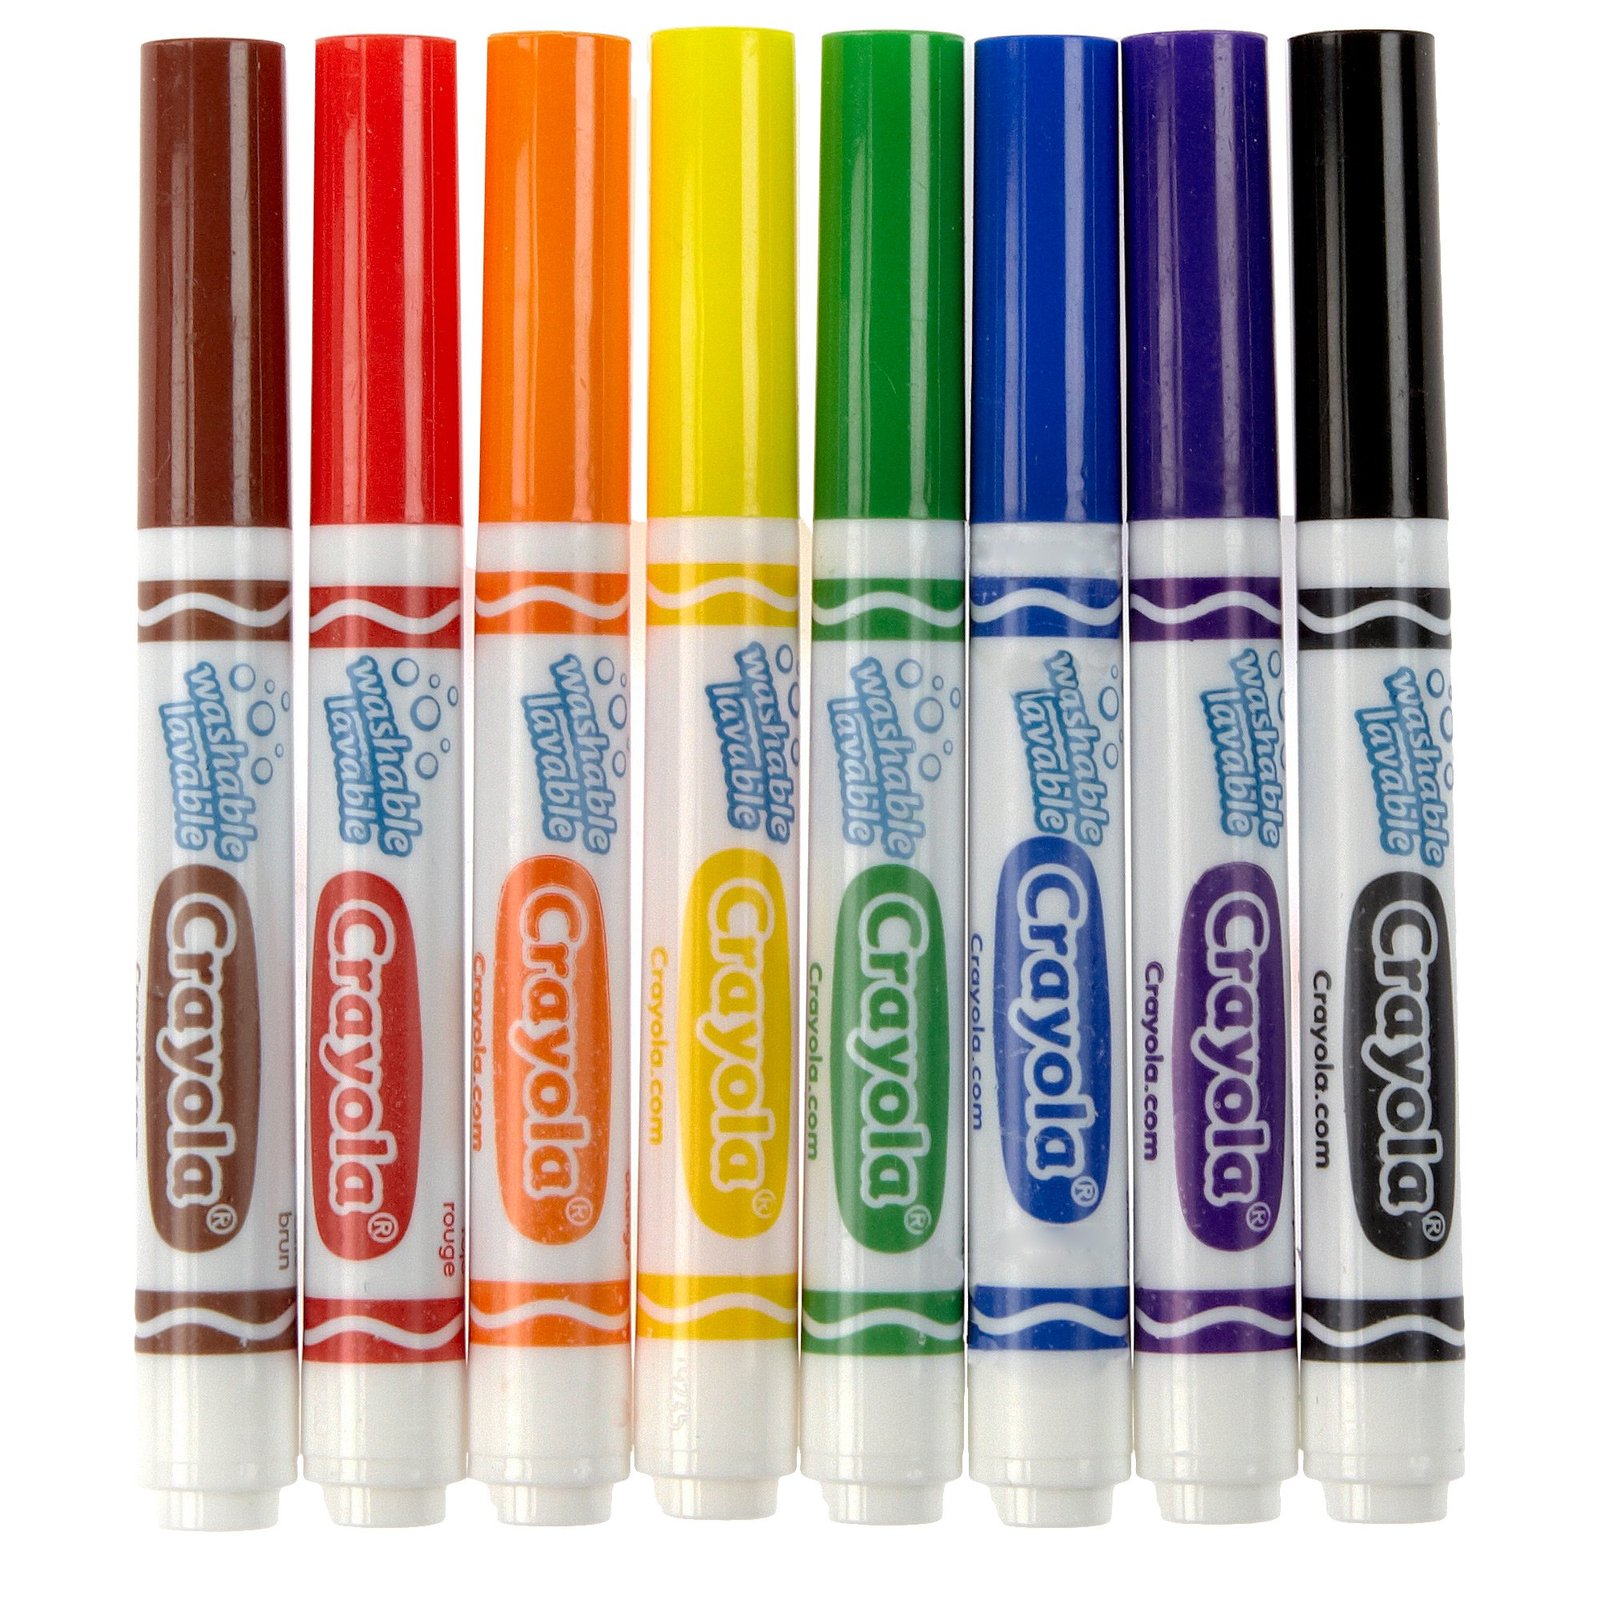 Crayola ct washable broad. Marker clipart old